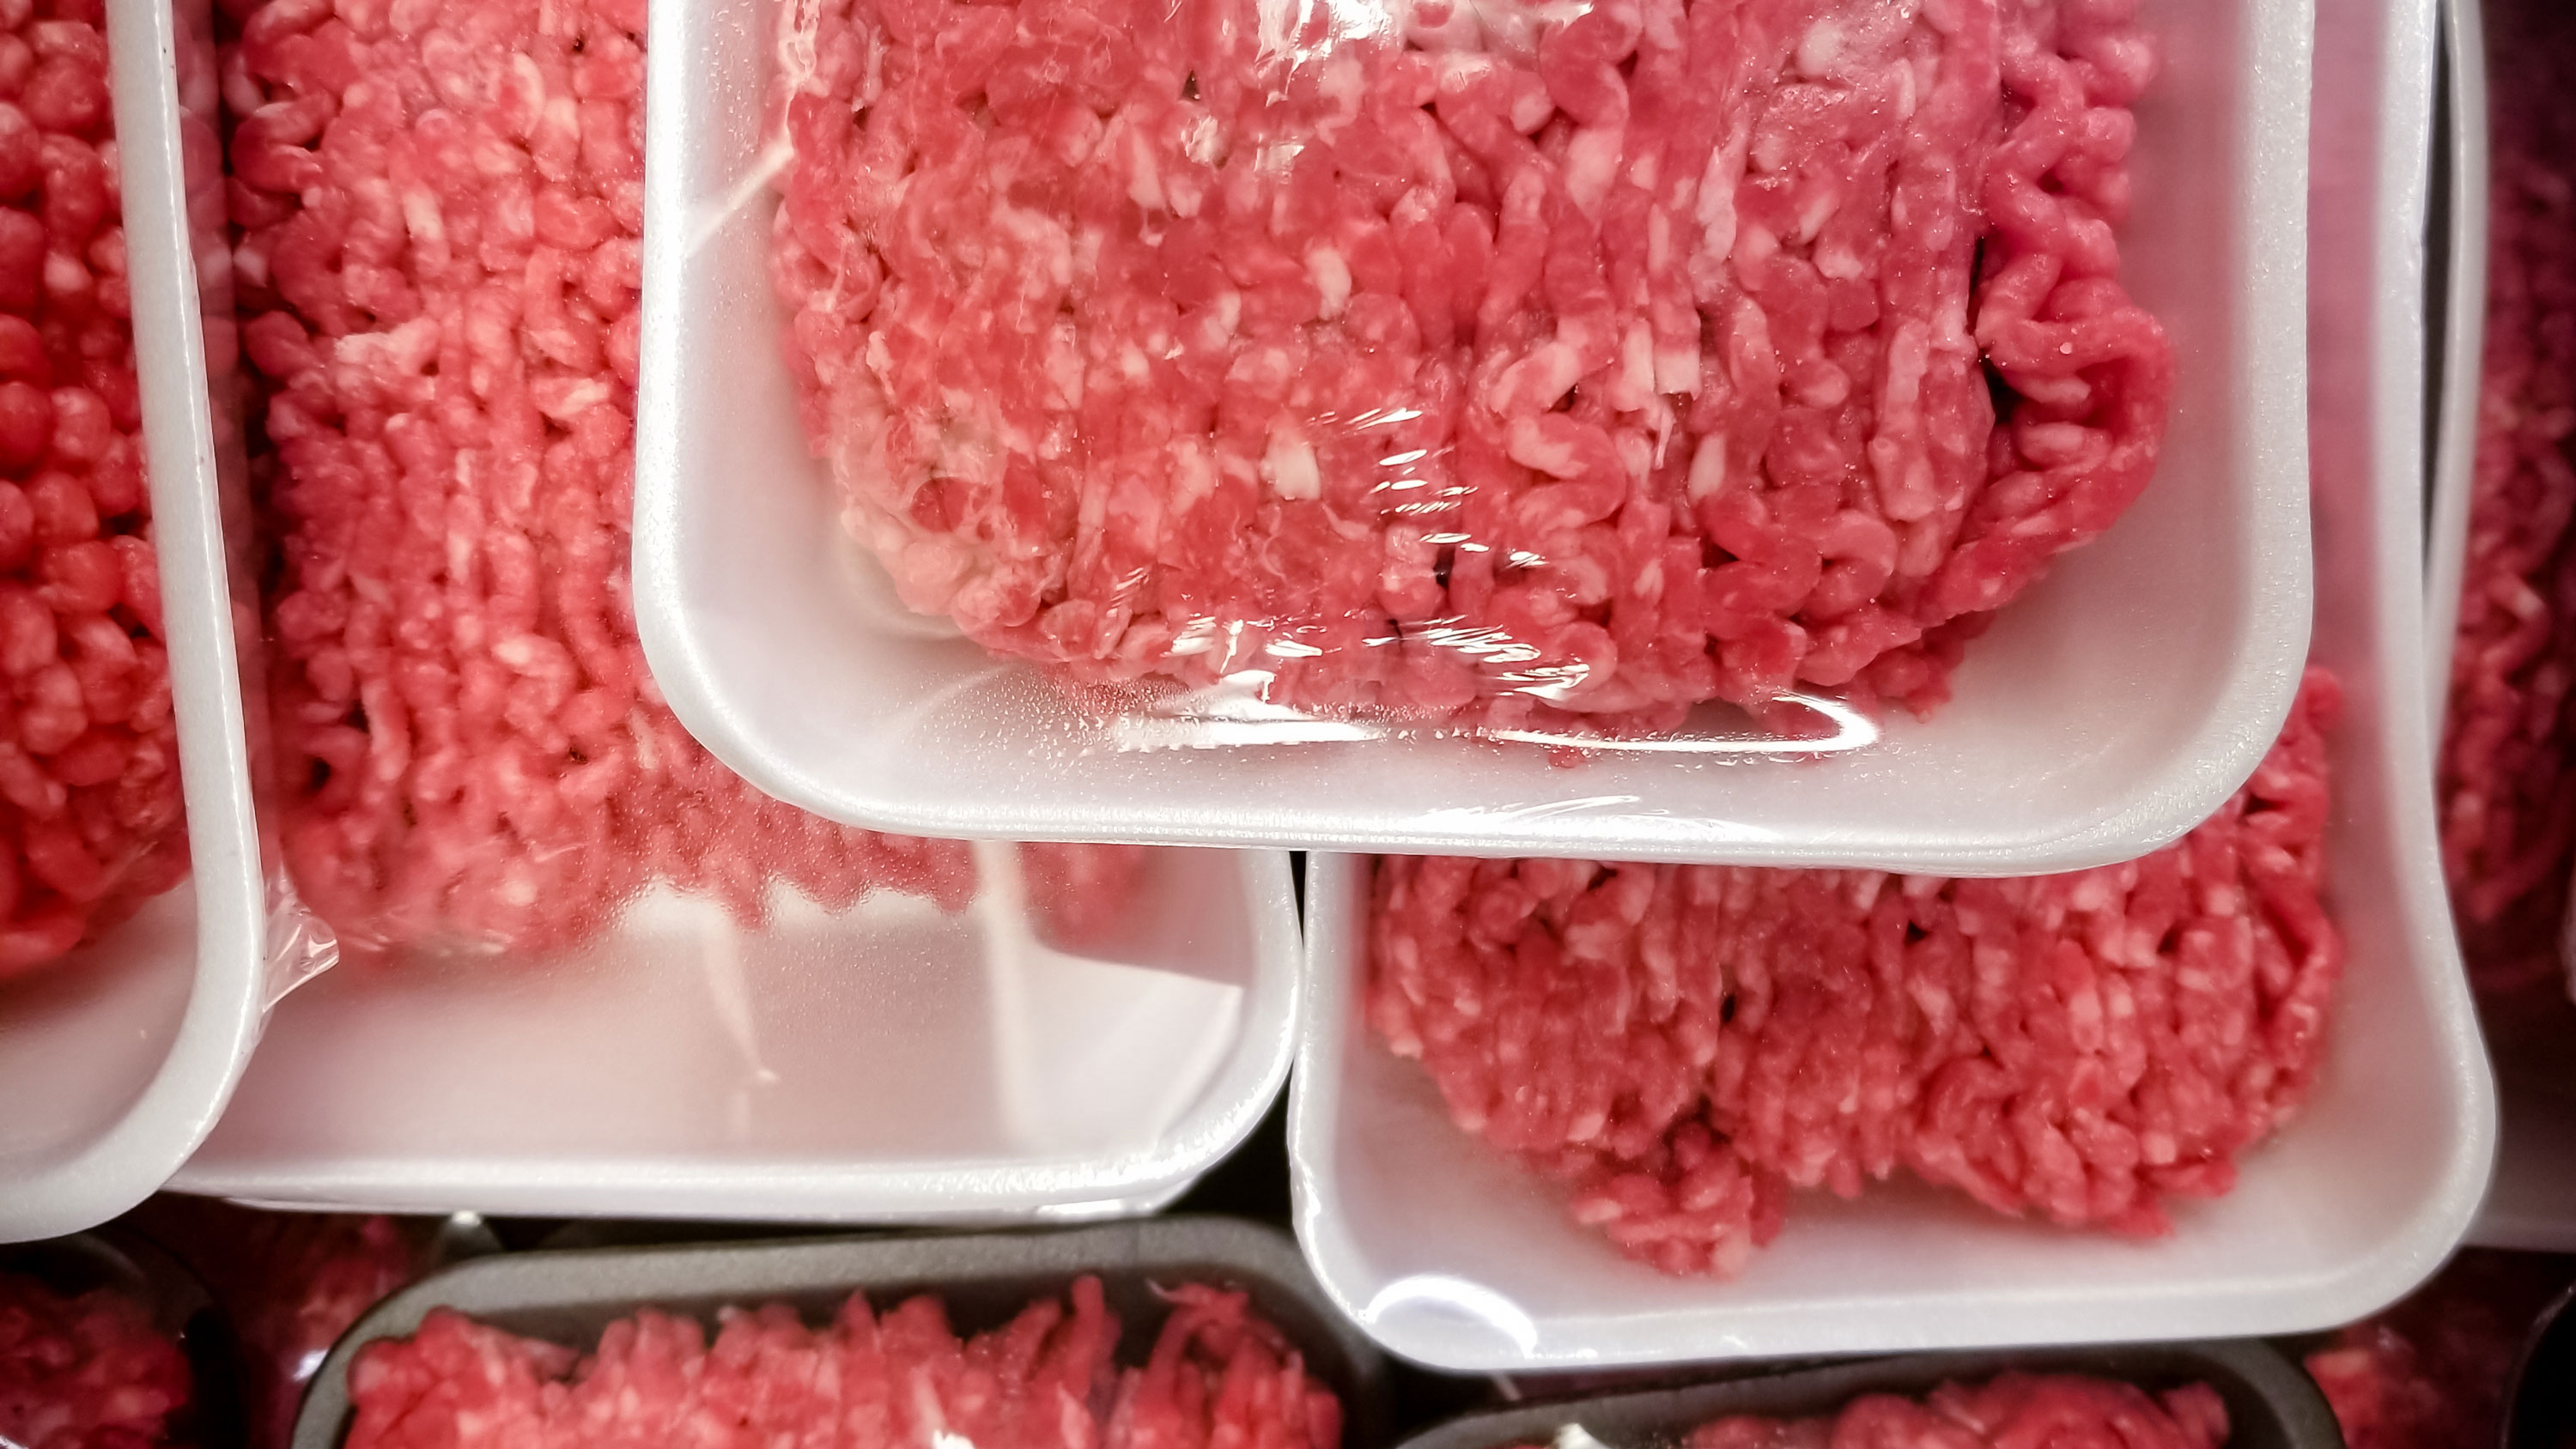 Sealed packages of ground beef stacked inside a meat cooler at a grocery store.